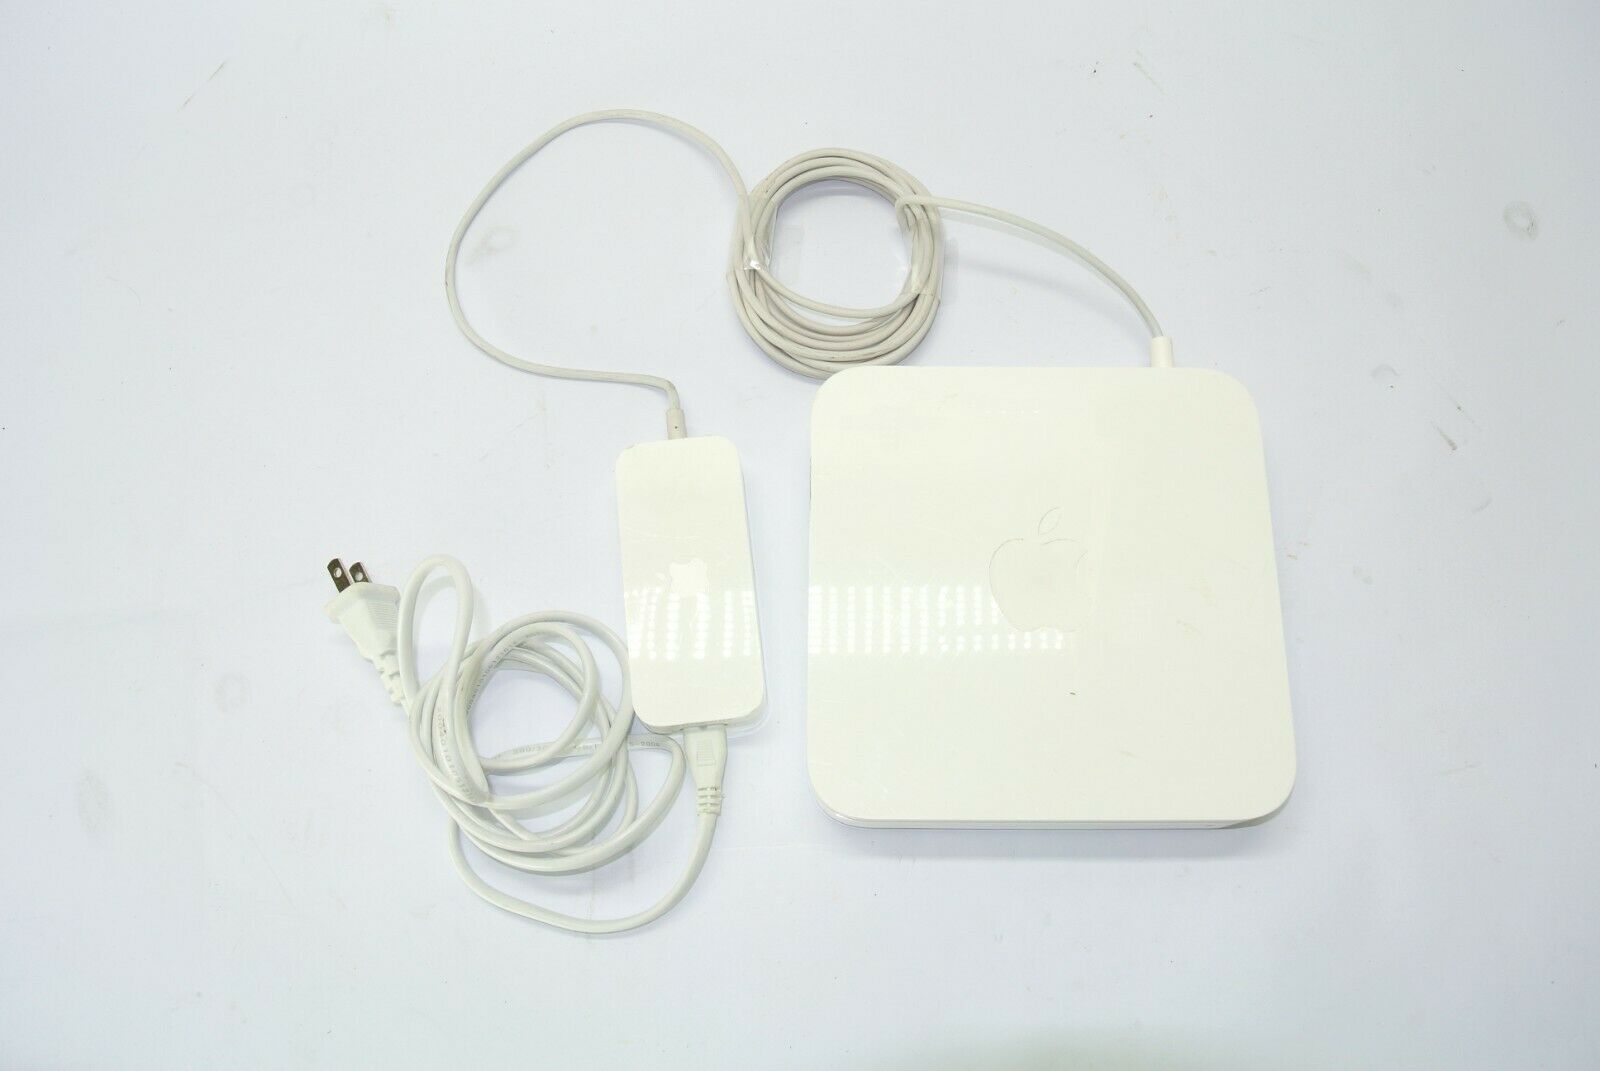 Apple Airport Extreme Base Station A1354 GREAT CONDITION 